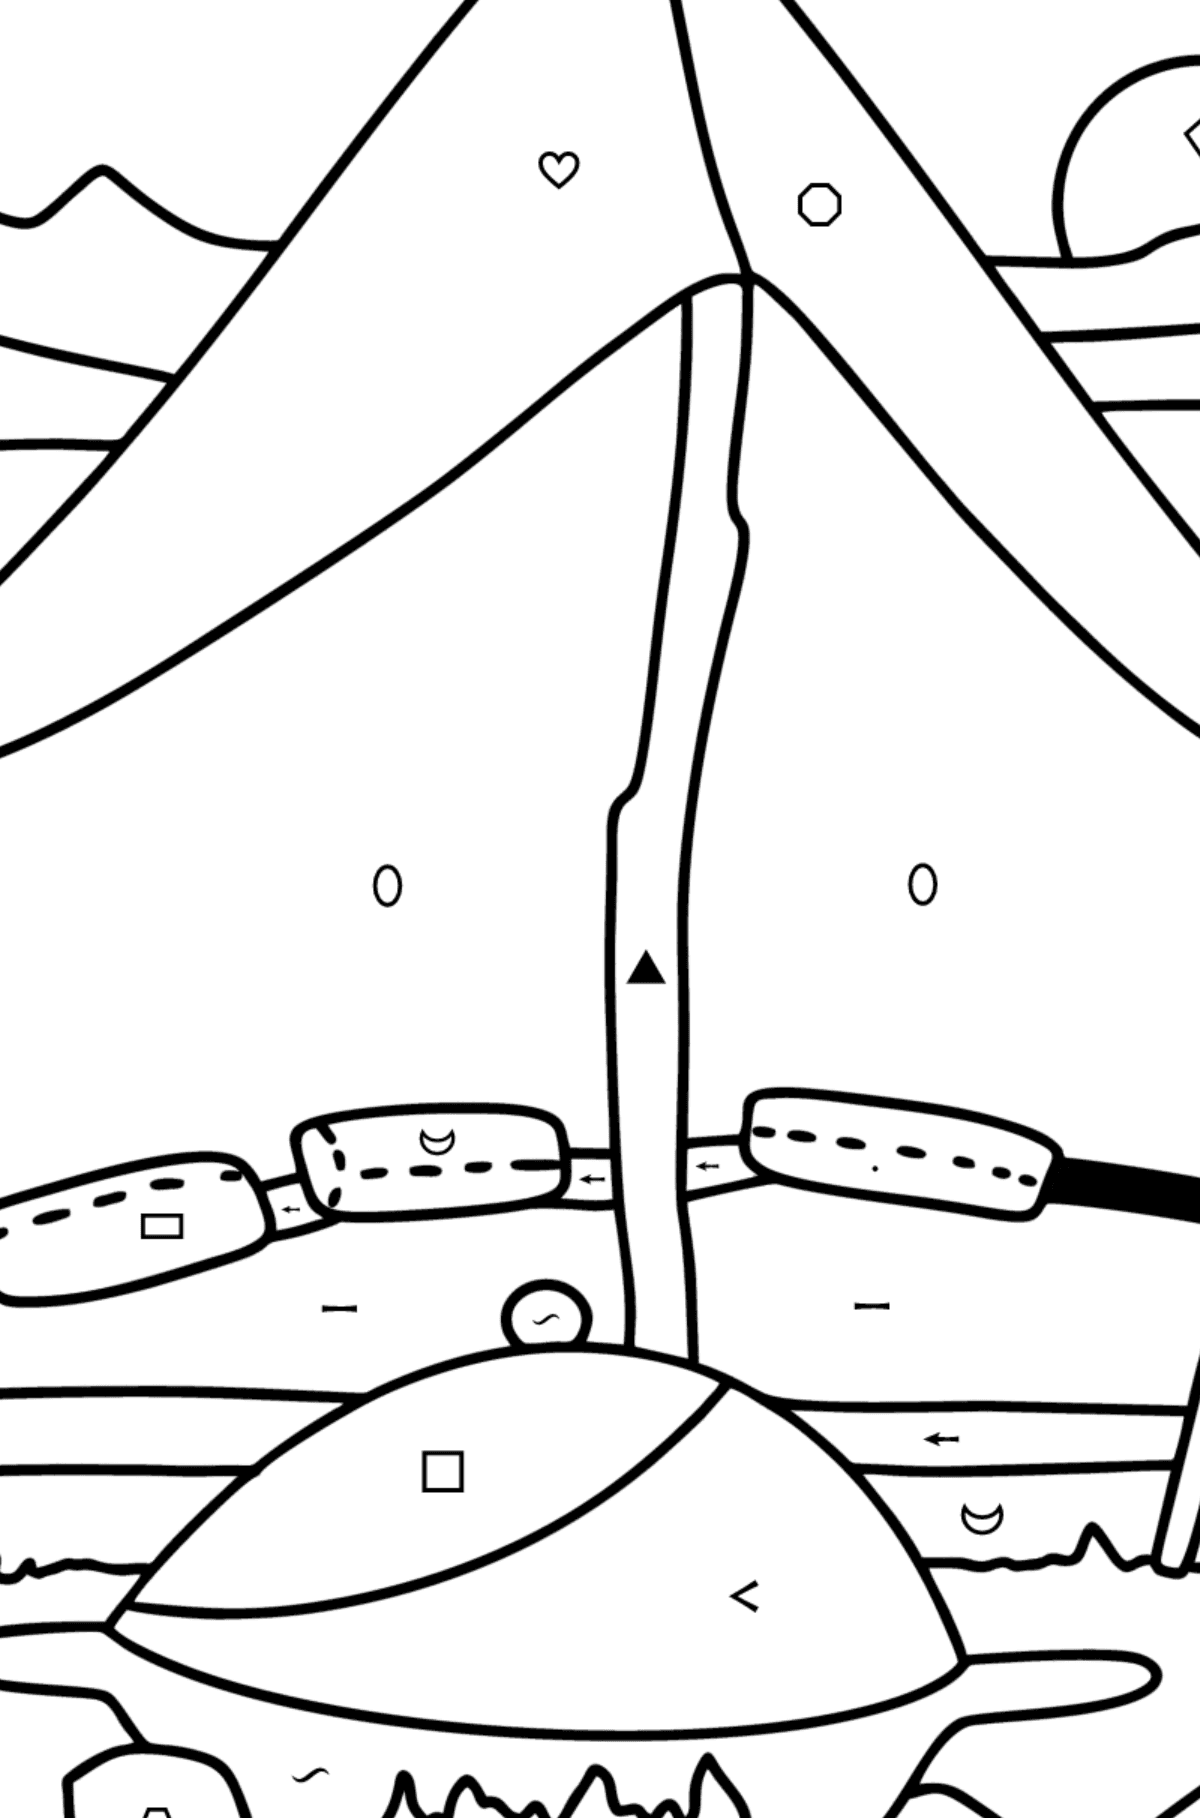 Bedouin tent coloring page - Coloring by Symbols and Geometric Shapes for Kids